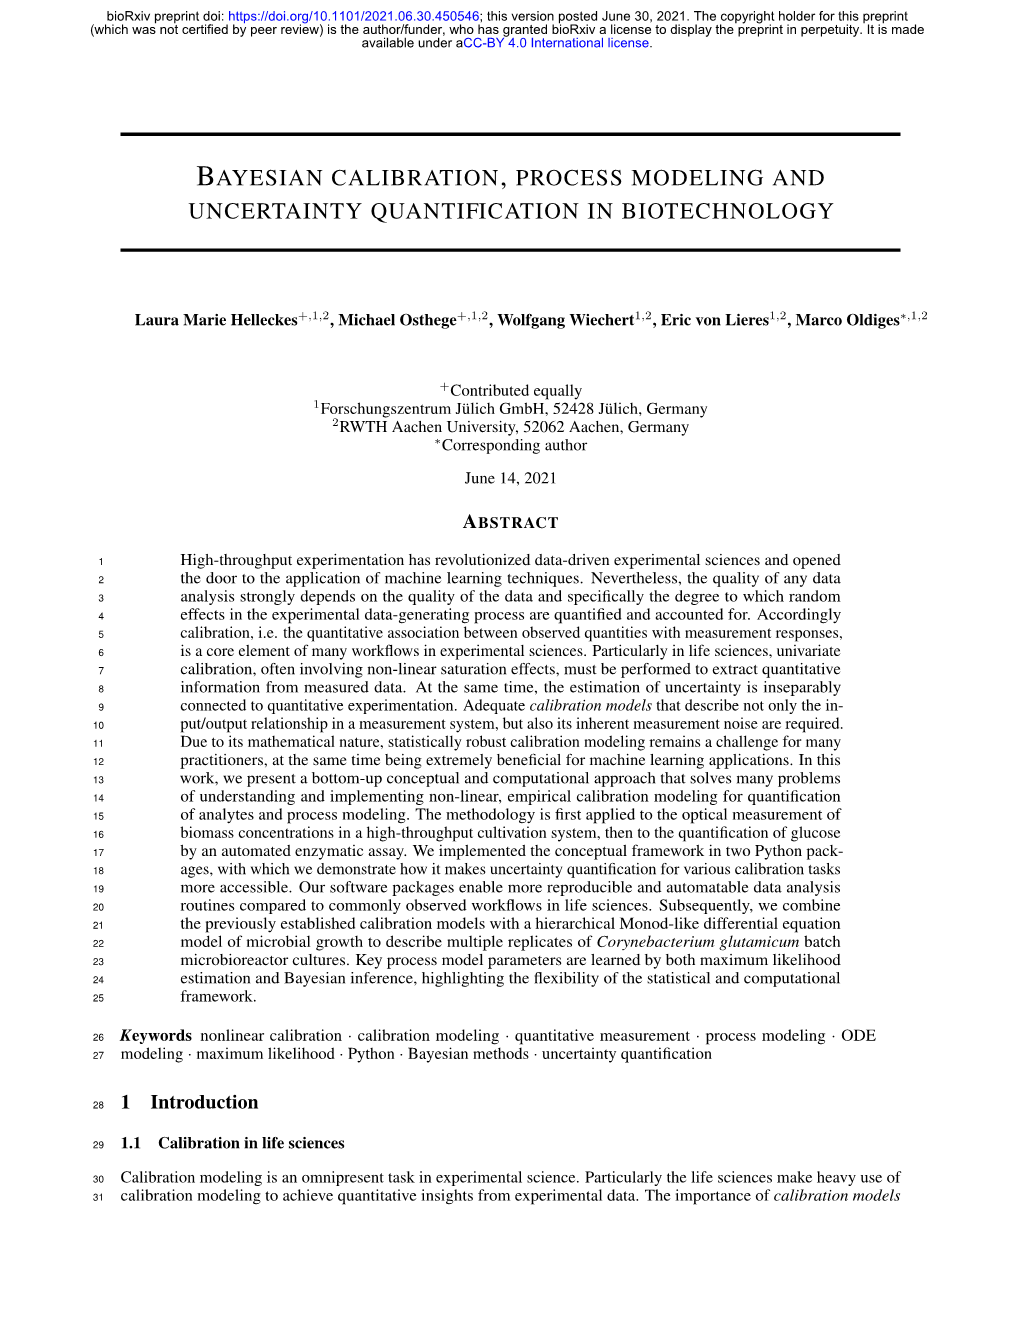 Bayesian Calibration, Process Modeling and Uncertainty Quantification in Biotechnology